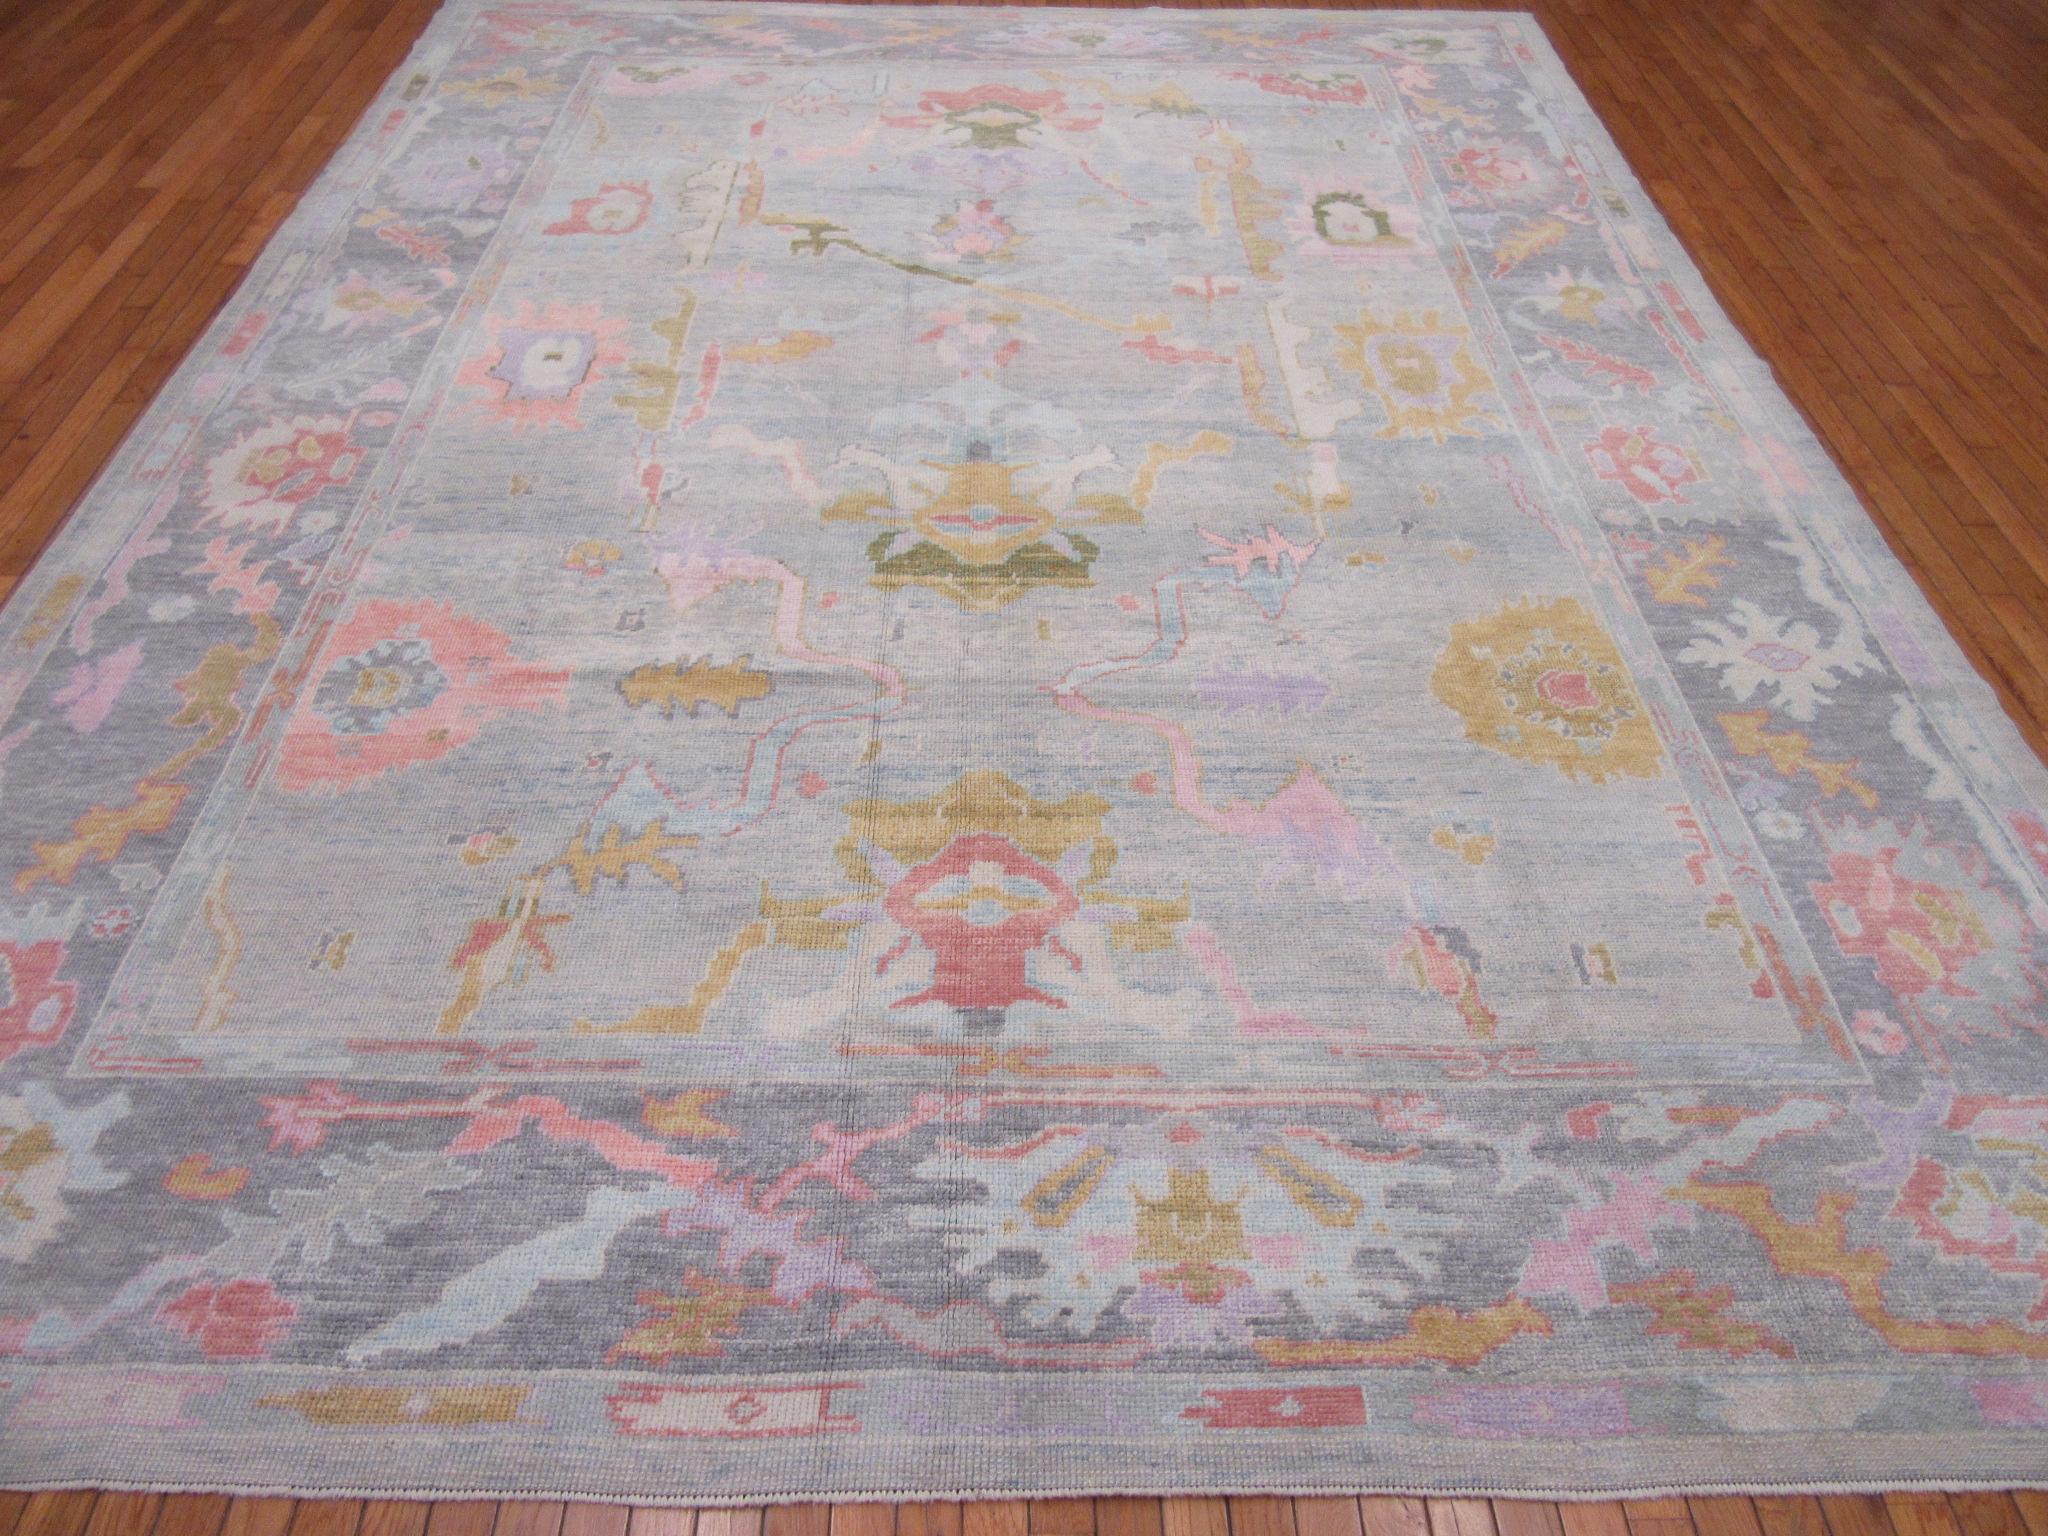 This is a new hand knotted room size Oushak design rug from Turkey. It is made with wool pile and wool foundation in a low pile finish and dyed with multiple fresh colors. It is a fun and happy rug with endless possibilities. It measures 9' x 12'.